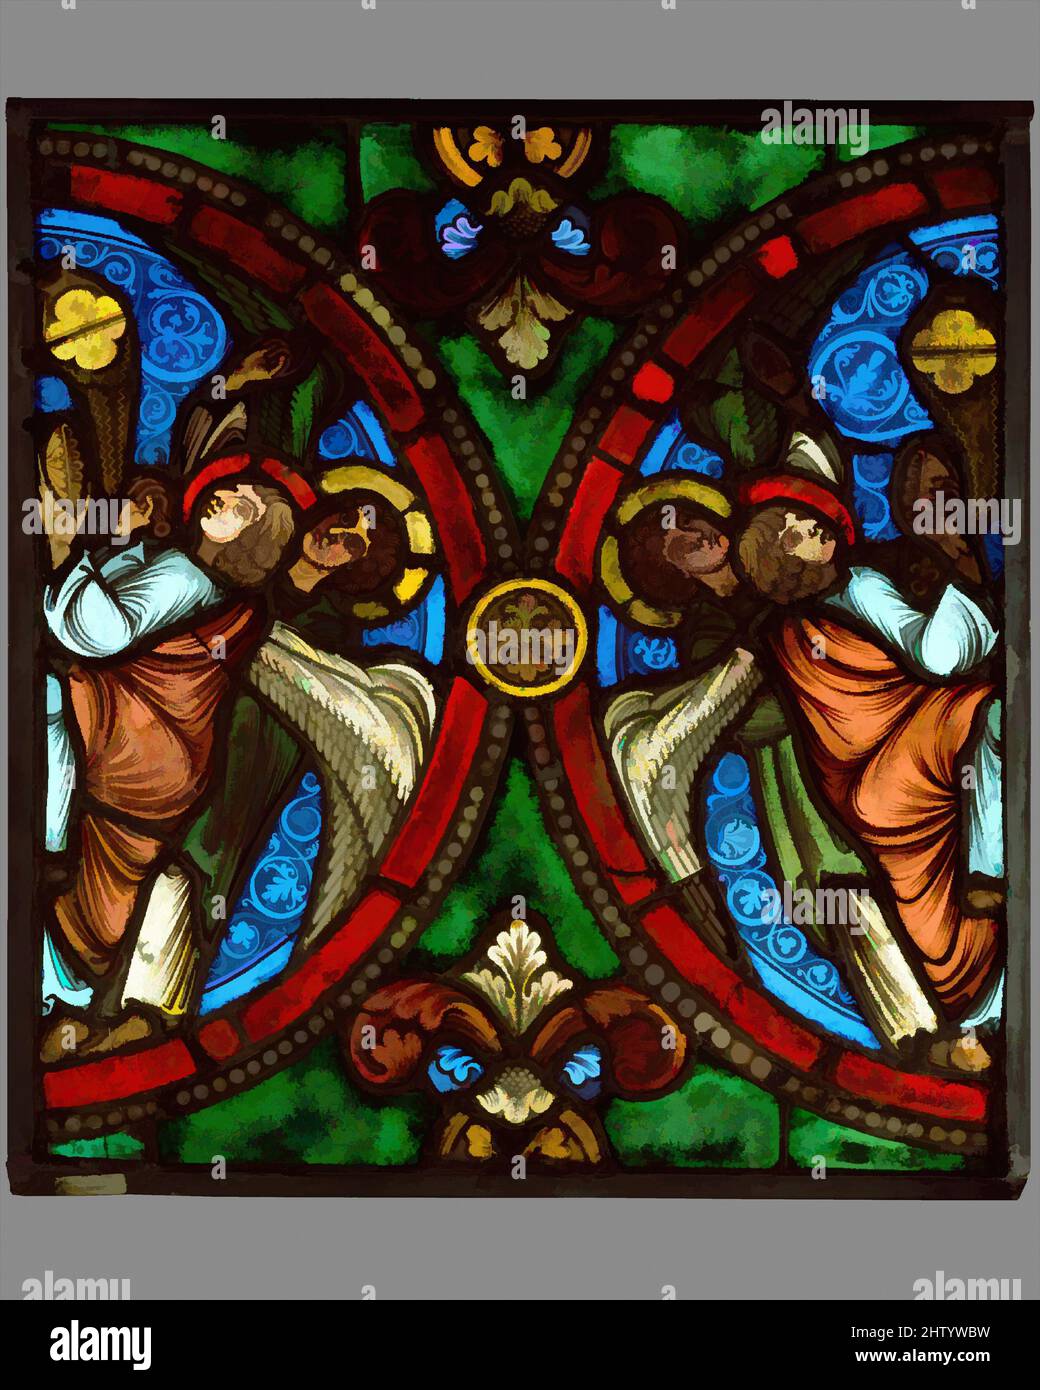 Art inspired by Angels Swinging Censers, ca. 1170, Made in Troyes, French, Pot-metal glass, vitreous paint, and lead, 18 1/2 x 17 5/16 in. (47 x 44 cm), Glass-Stained, The stained glass produced for the Collegiate Church of Saint-Étienne in Troyes during the late twelfth century, Classic works modernized by Artotop with a splash of modernity. Shapes, color and value, eye-catching visual impact on art. Emotions through freedom of artworks in a contemporary way. A timeless message pursuing a wildly creative new direction. Artists turning to the digital medium and creating the Artotop NFT Stock Photo